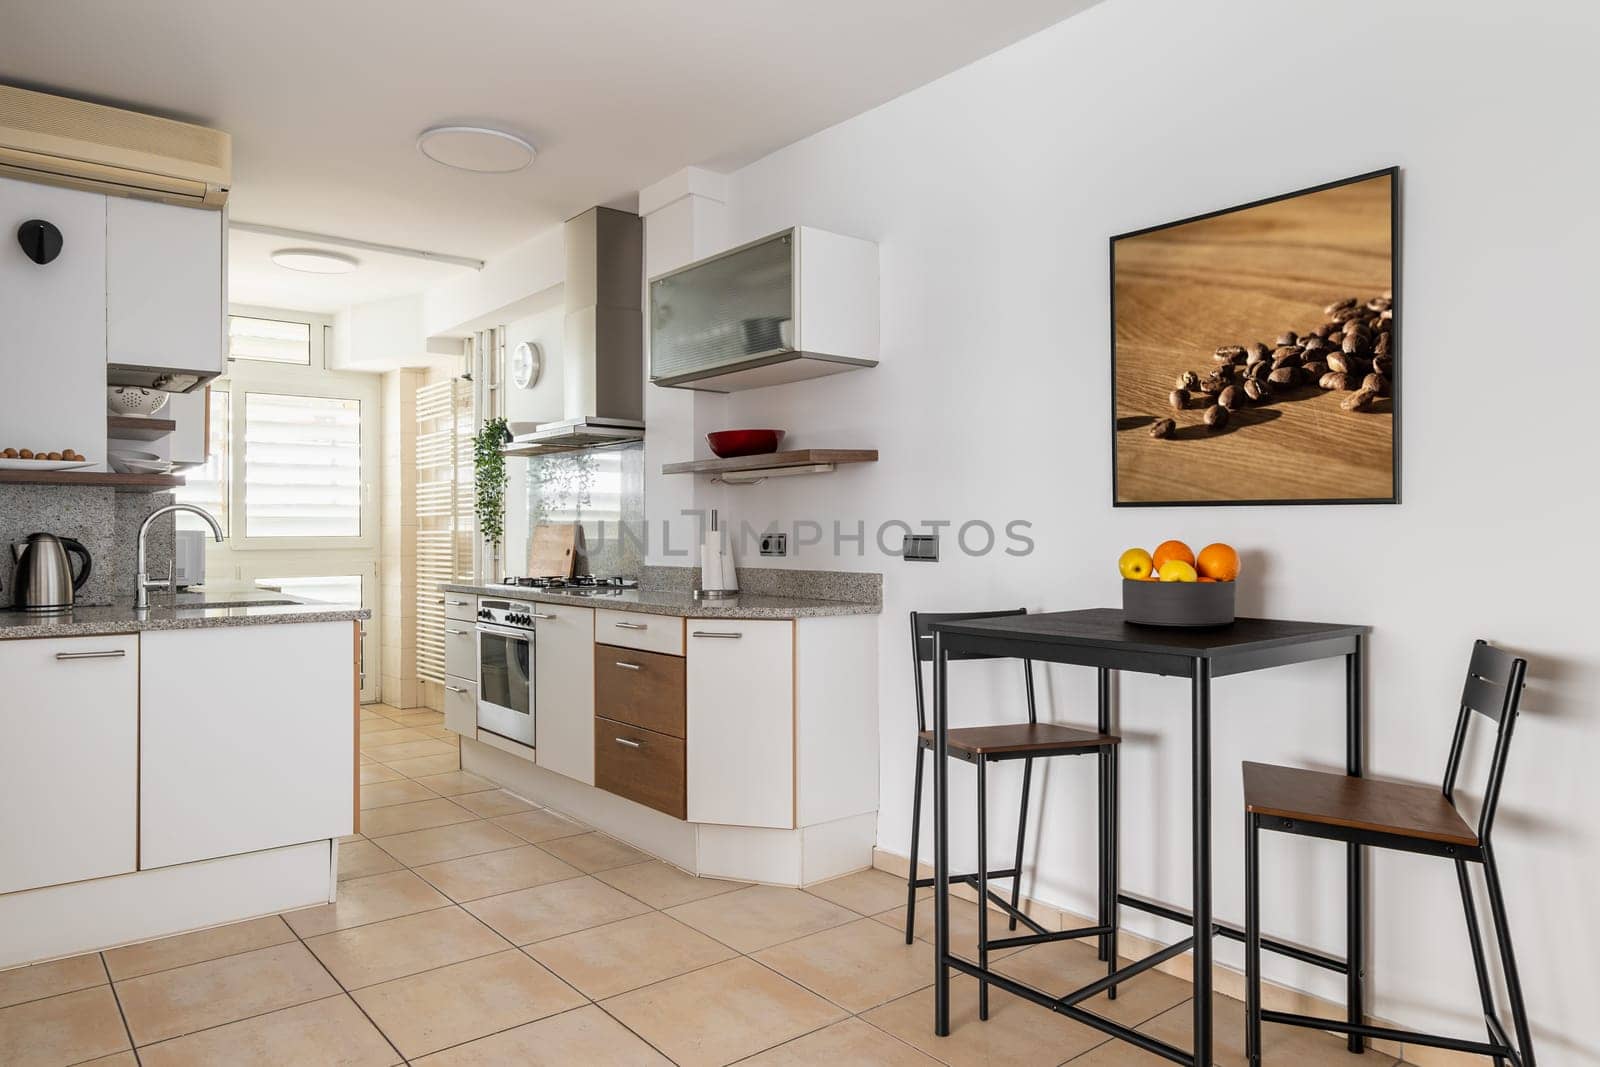 Kitchen area with units and high table to eat in smart apartment studio. Light comfortable room for cooking and rest in renovated residential house